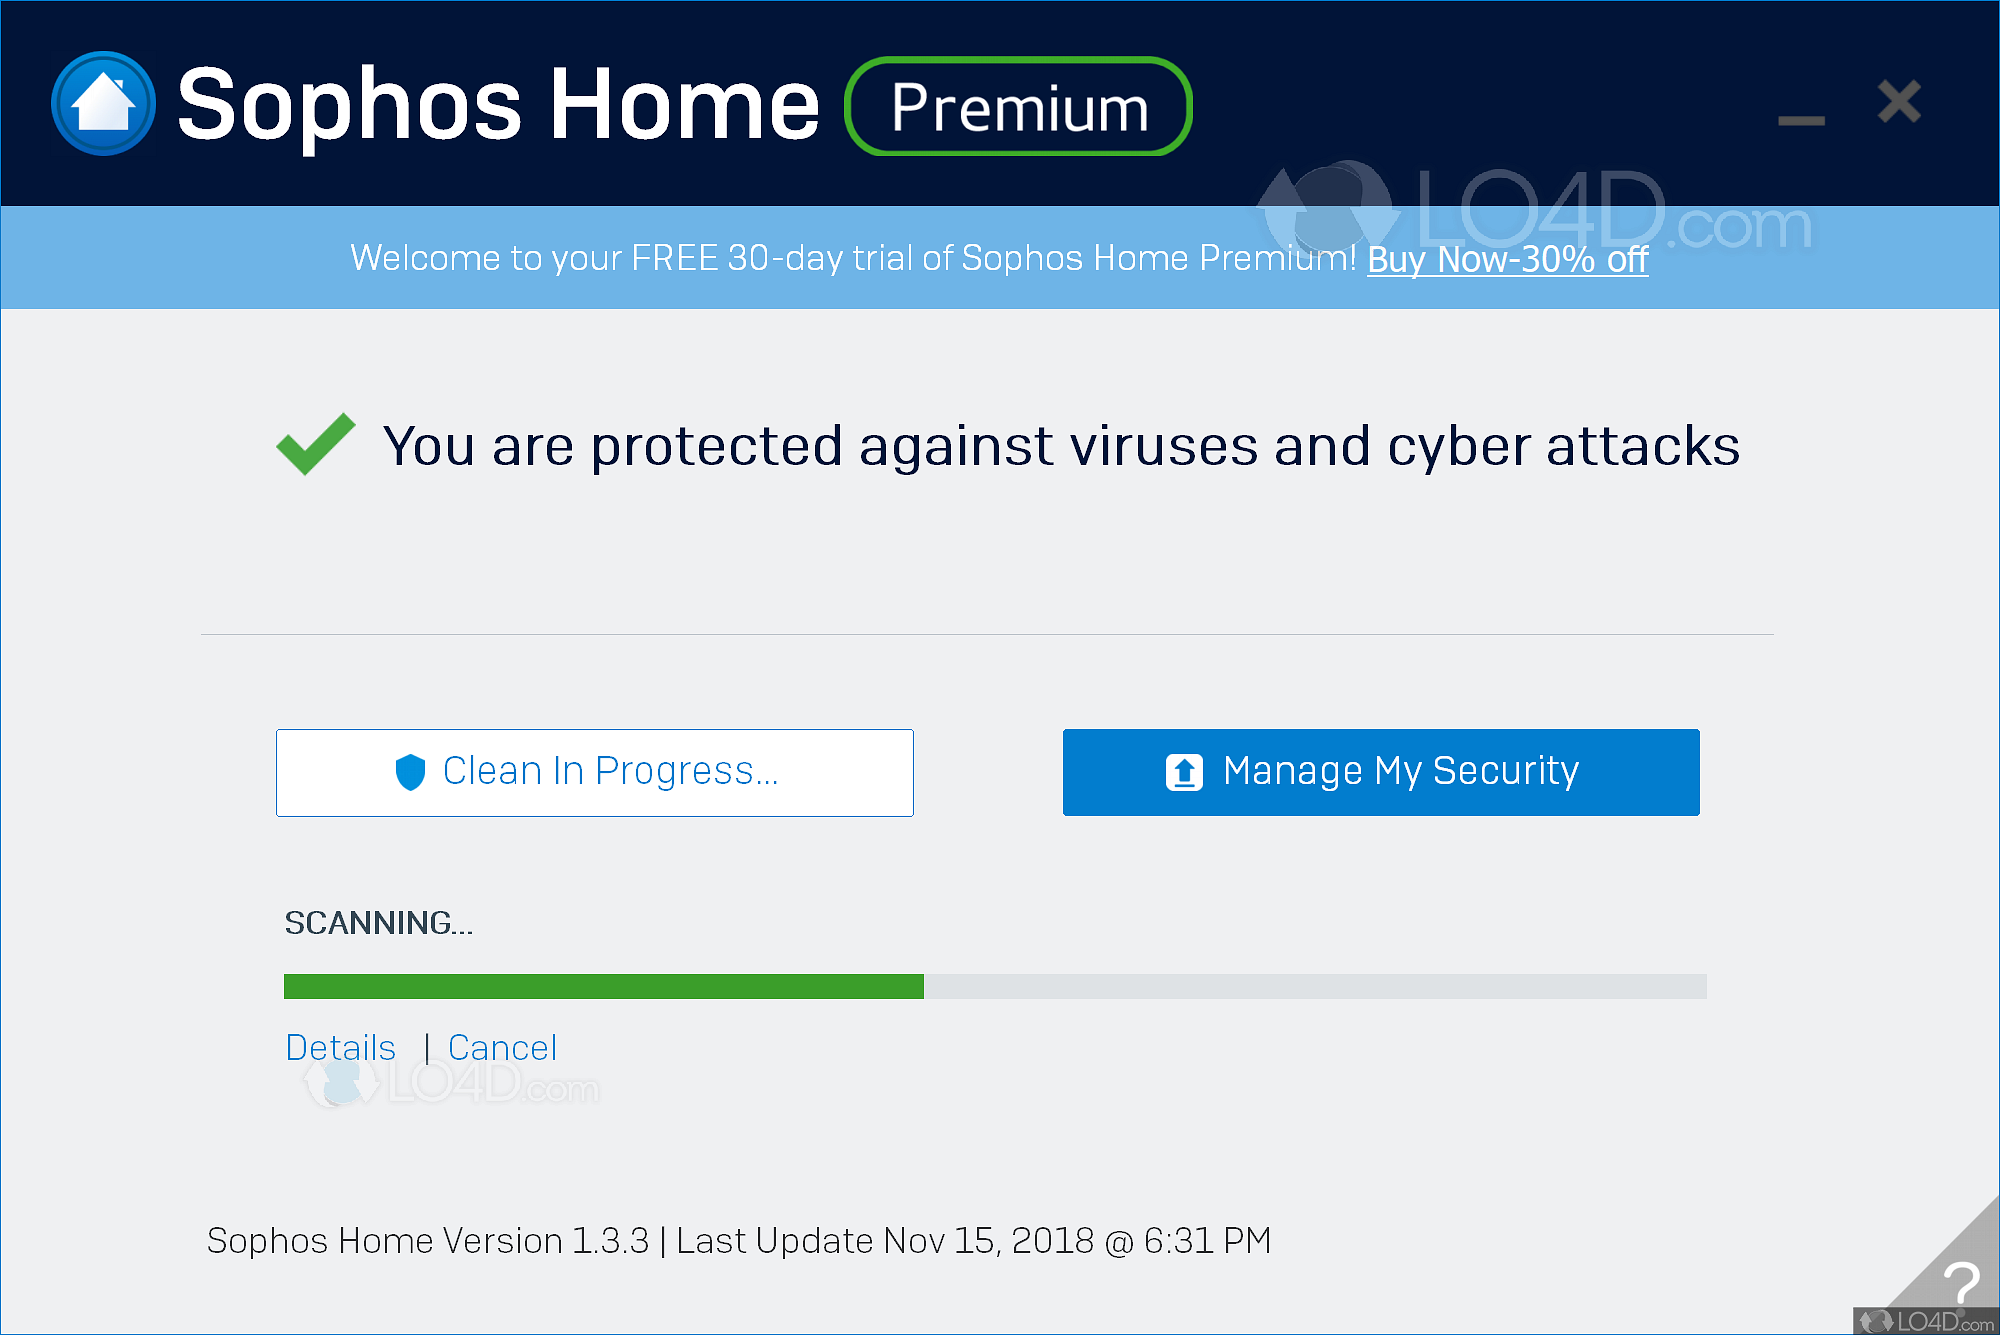 who owns sophos home premium